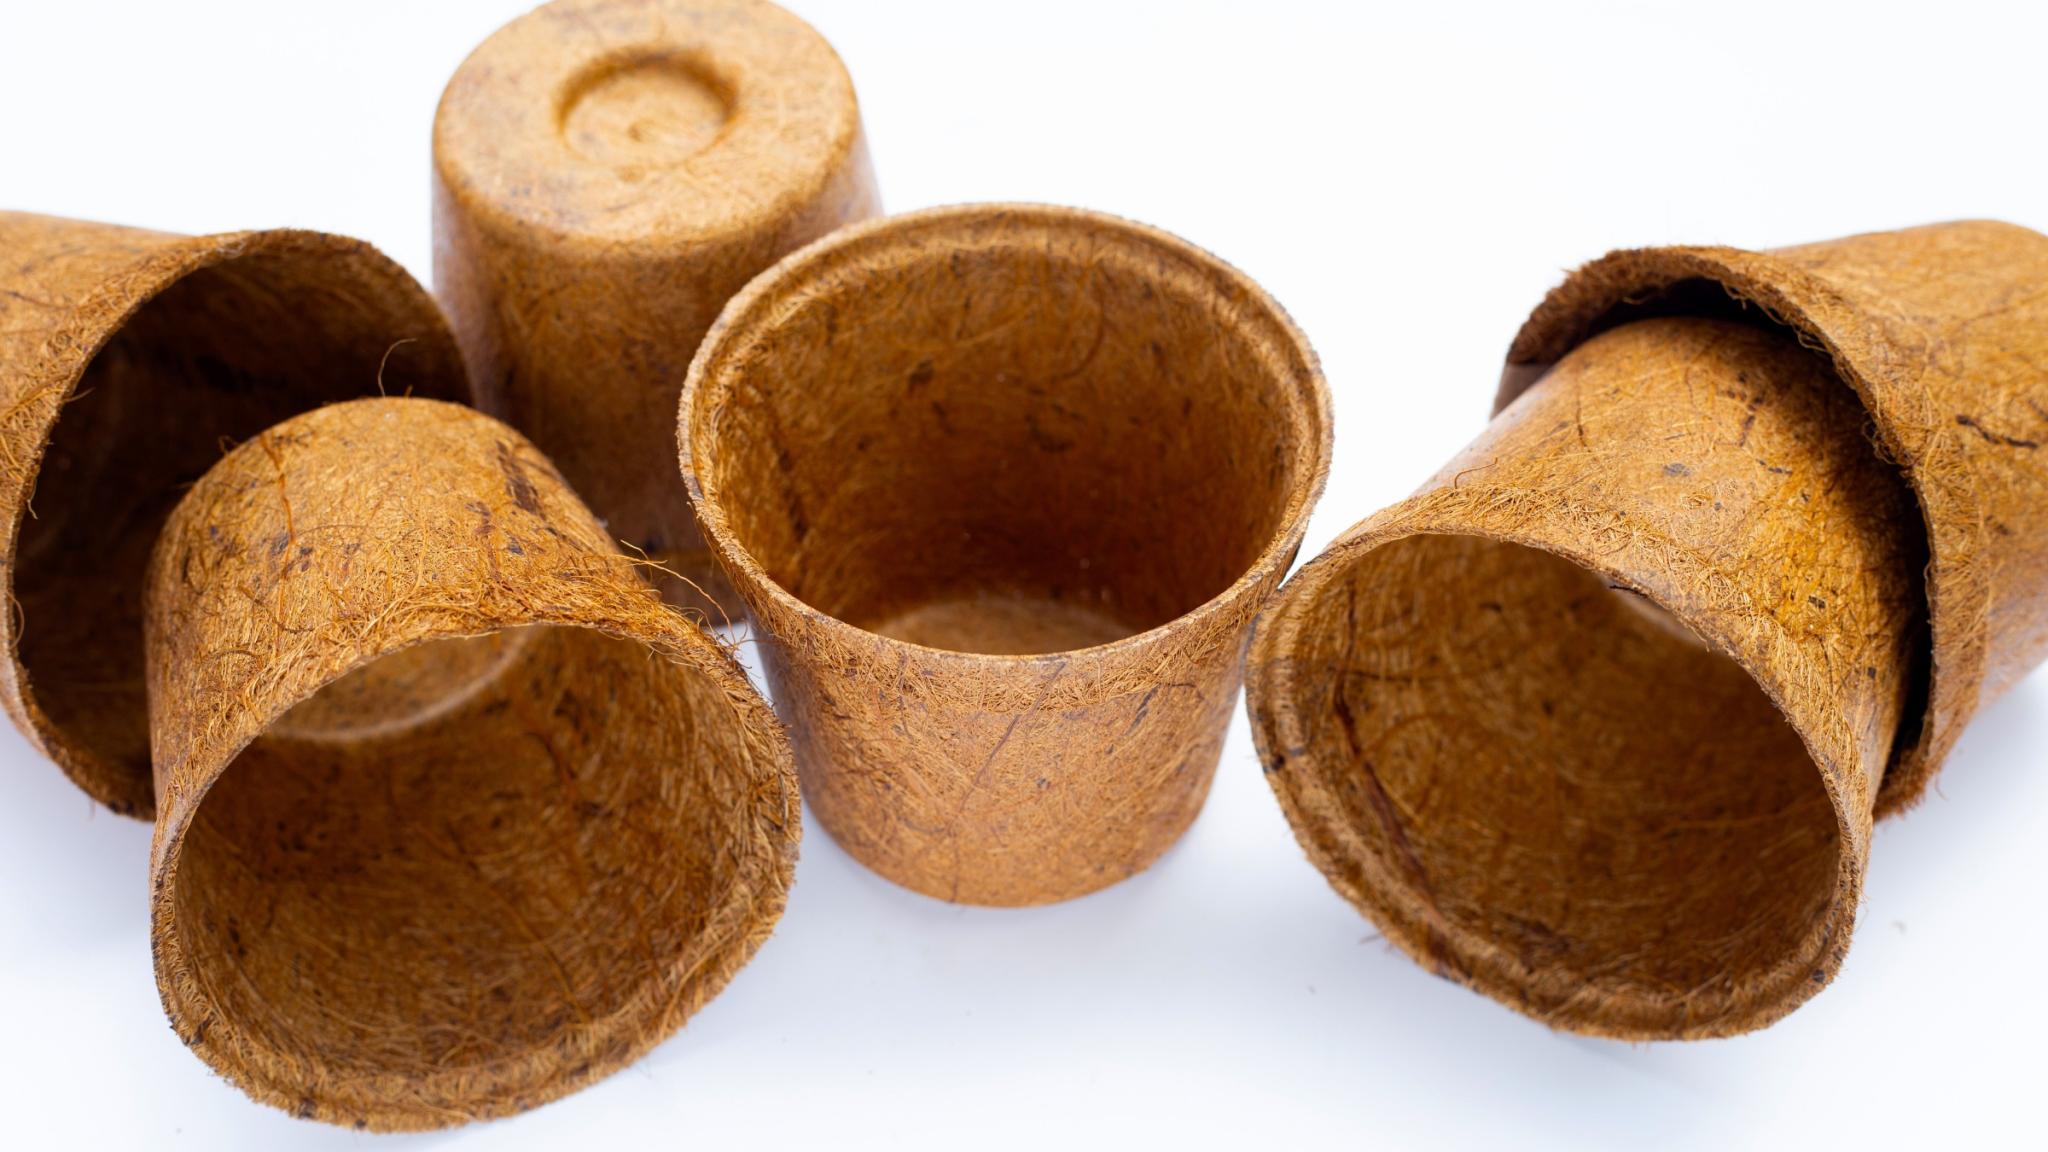 Pots made from coco coir